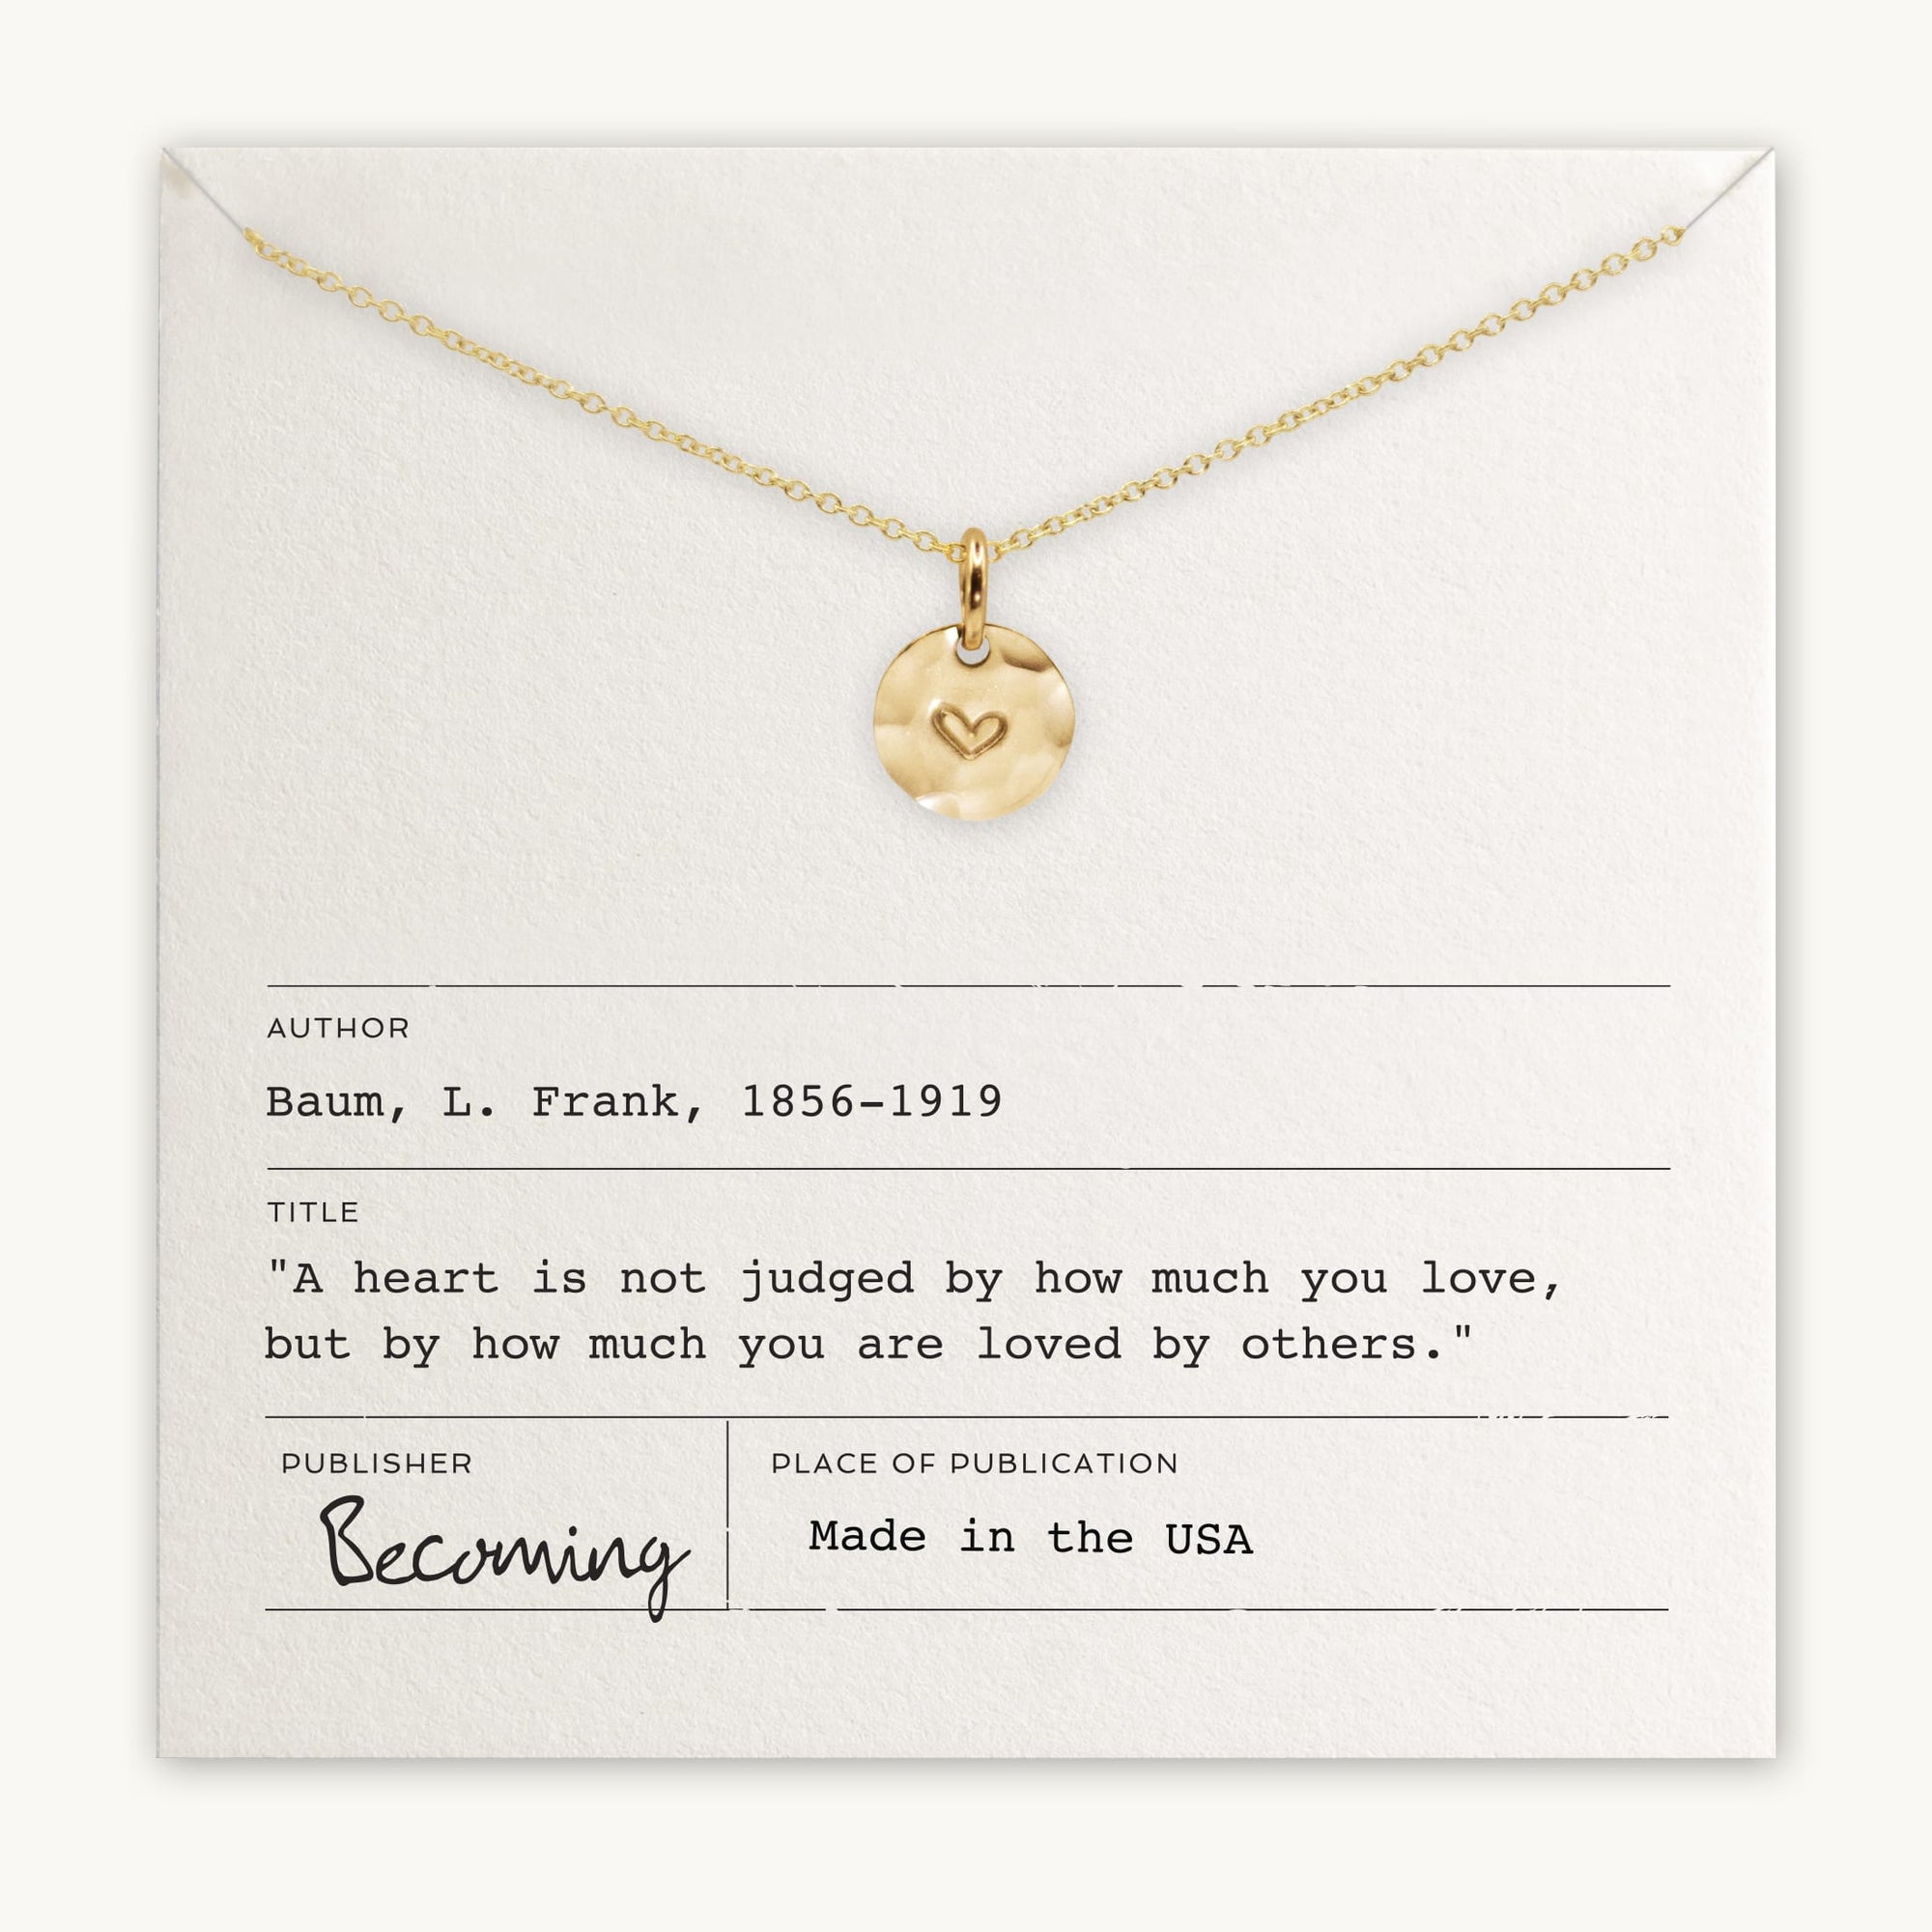 Becoming Jewelry Sterling Silver Heart Necklace displayed on a card with an inspirational quote.